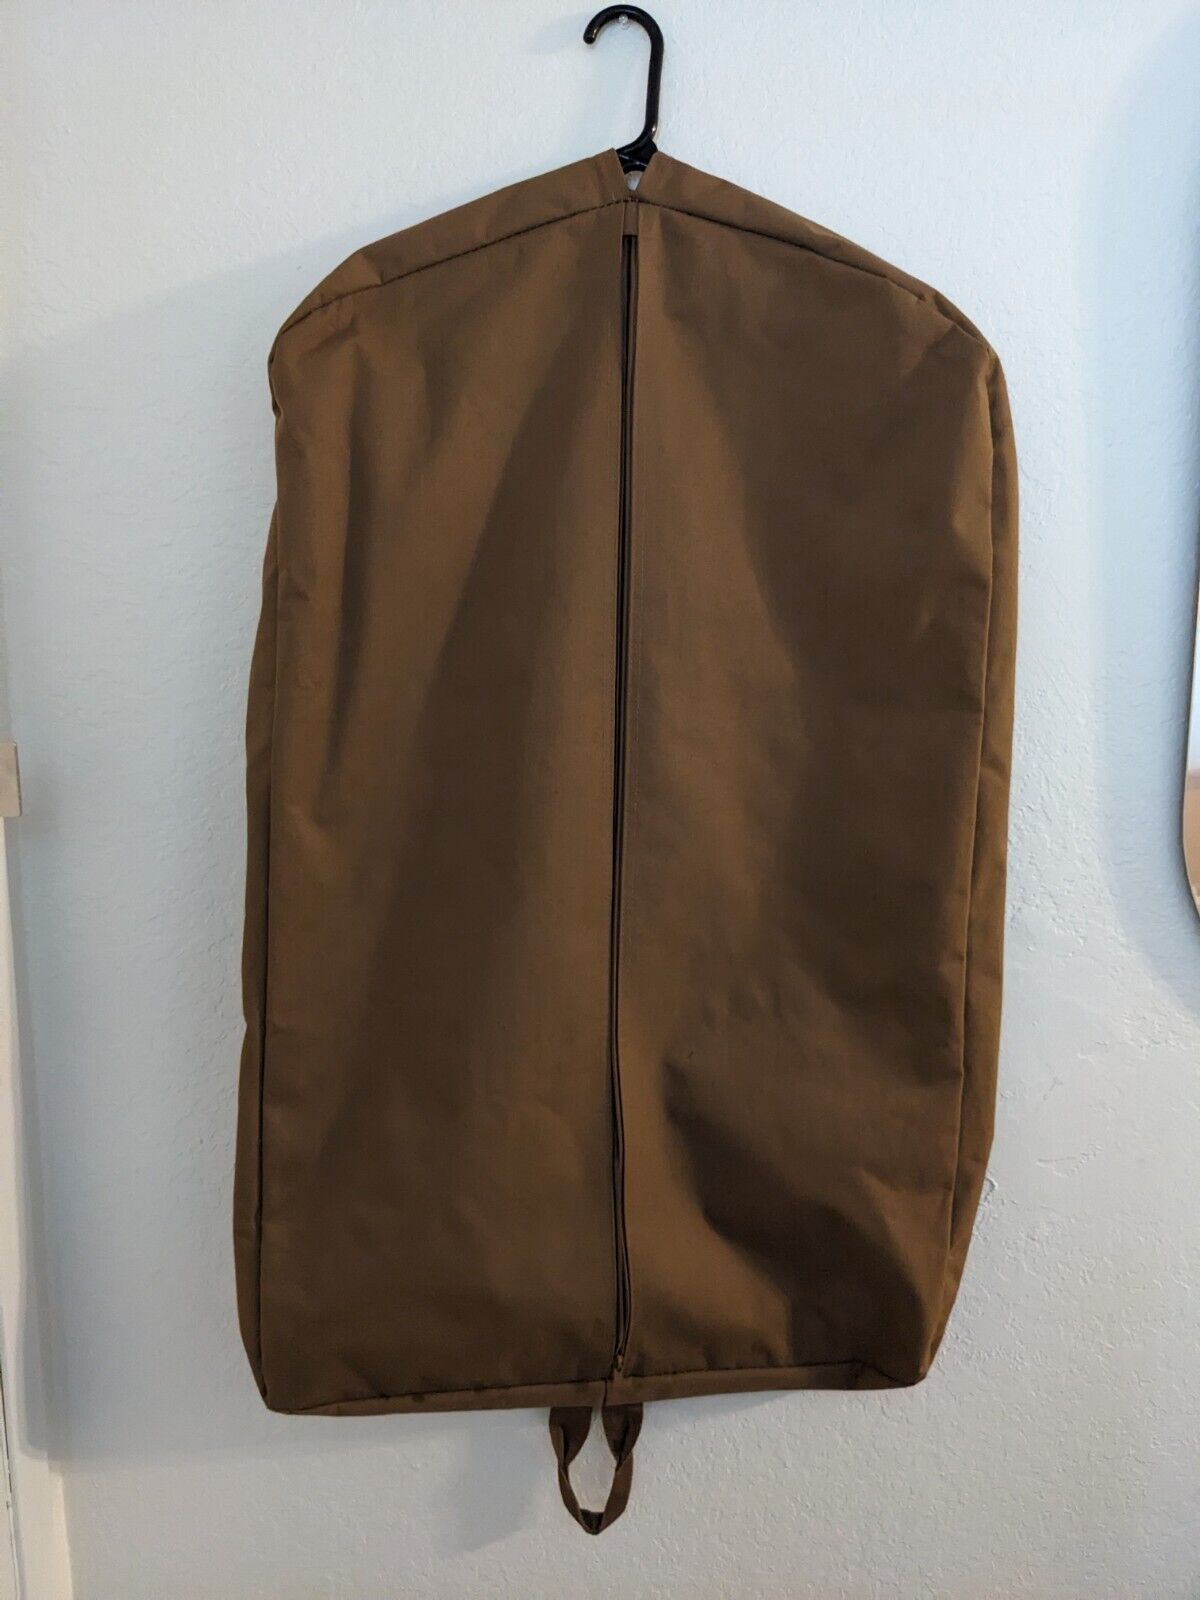 USMC Coyote Brown Issued Garment Bag